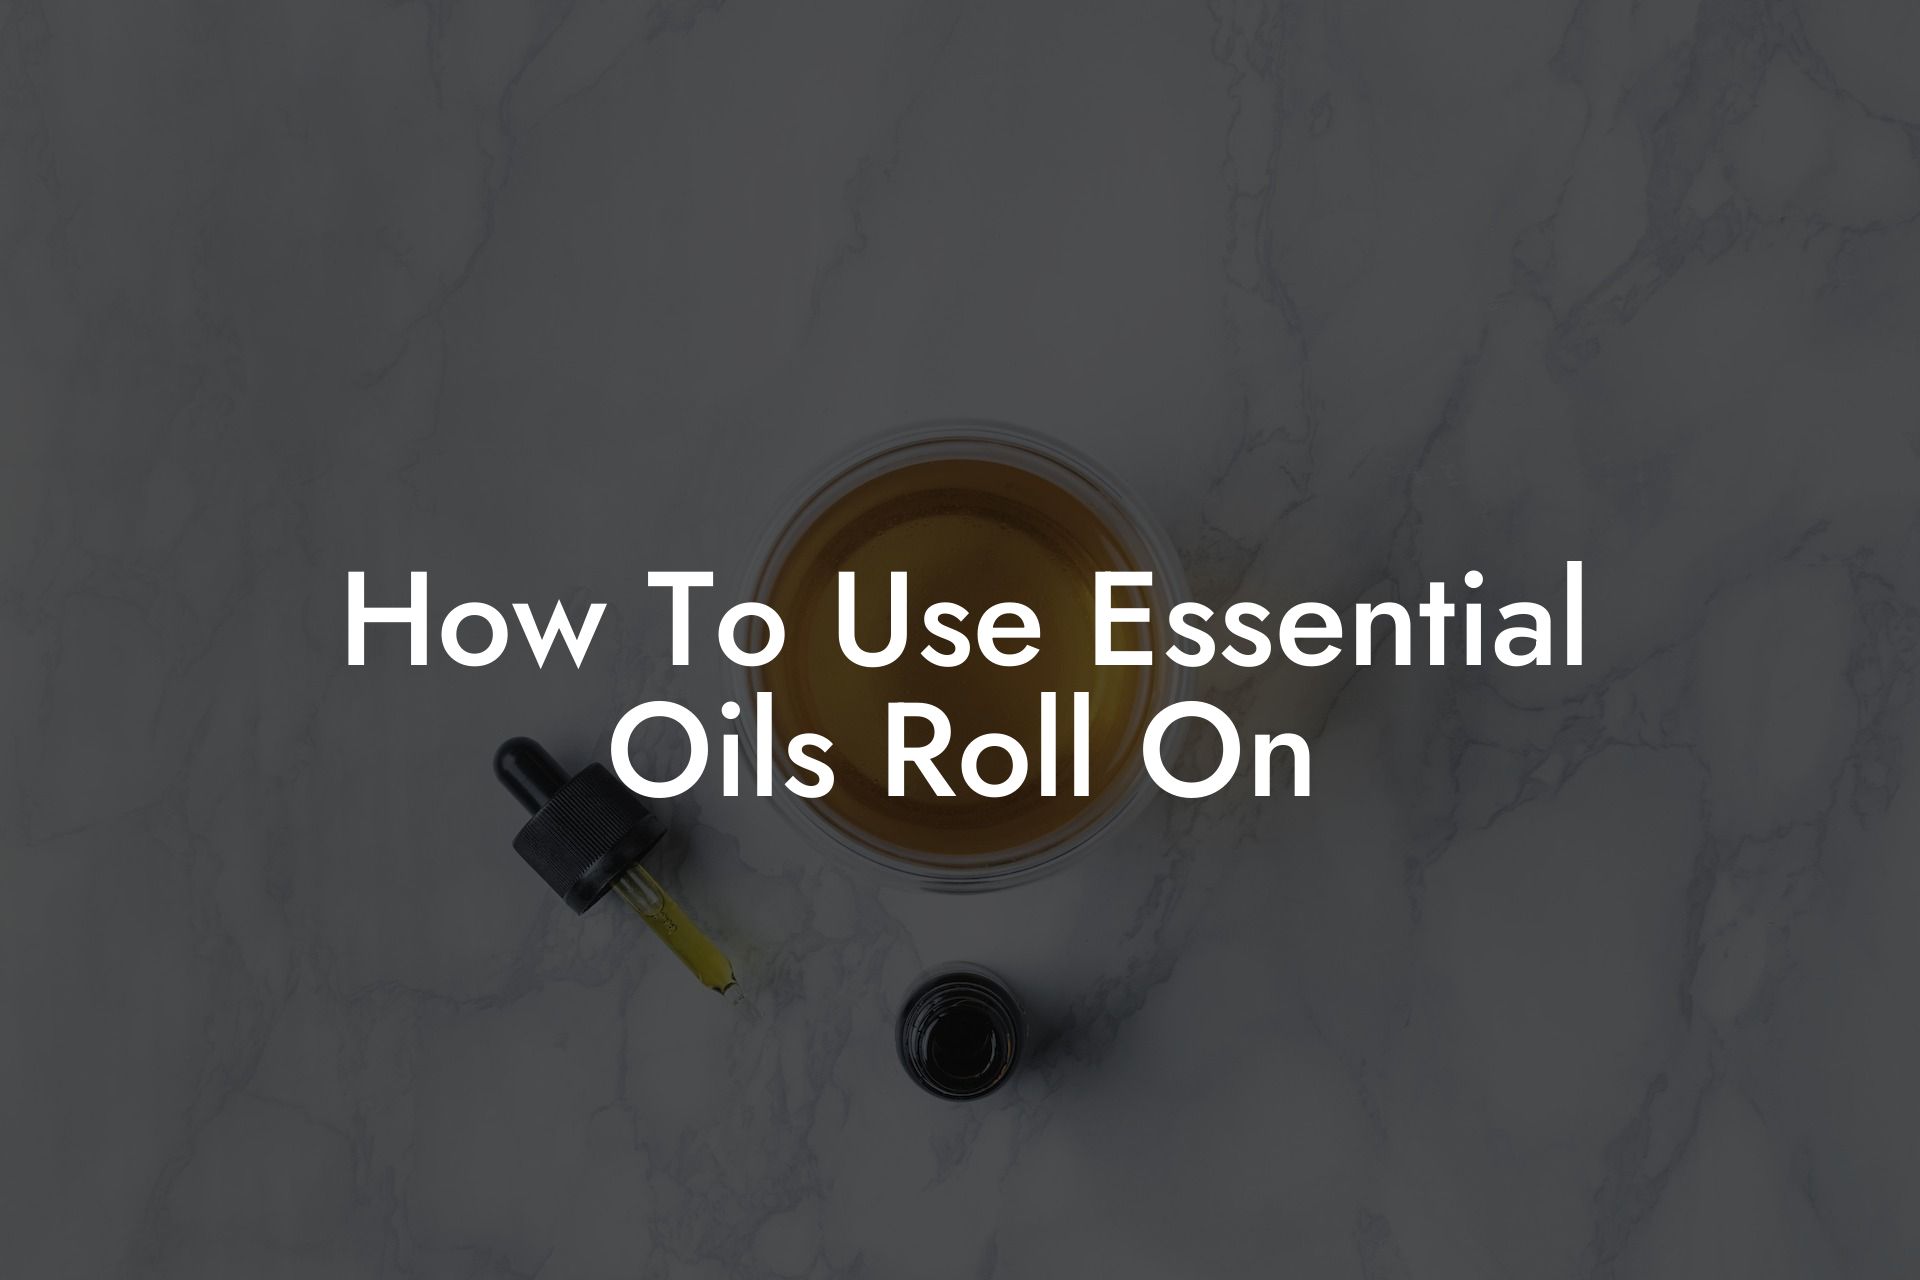 How To Use Essential Oils Roll On